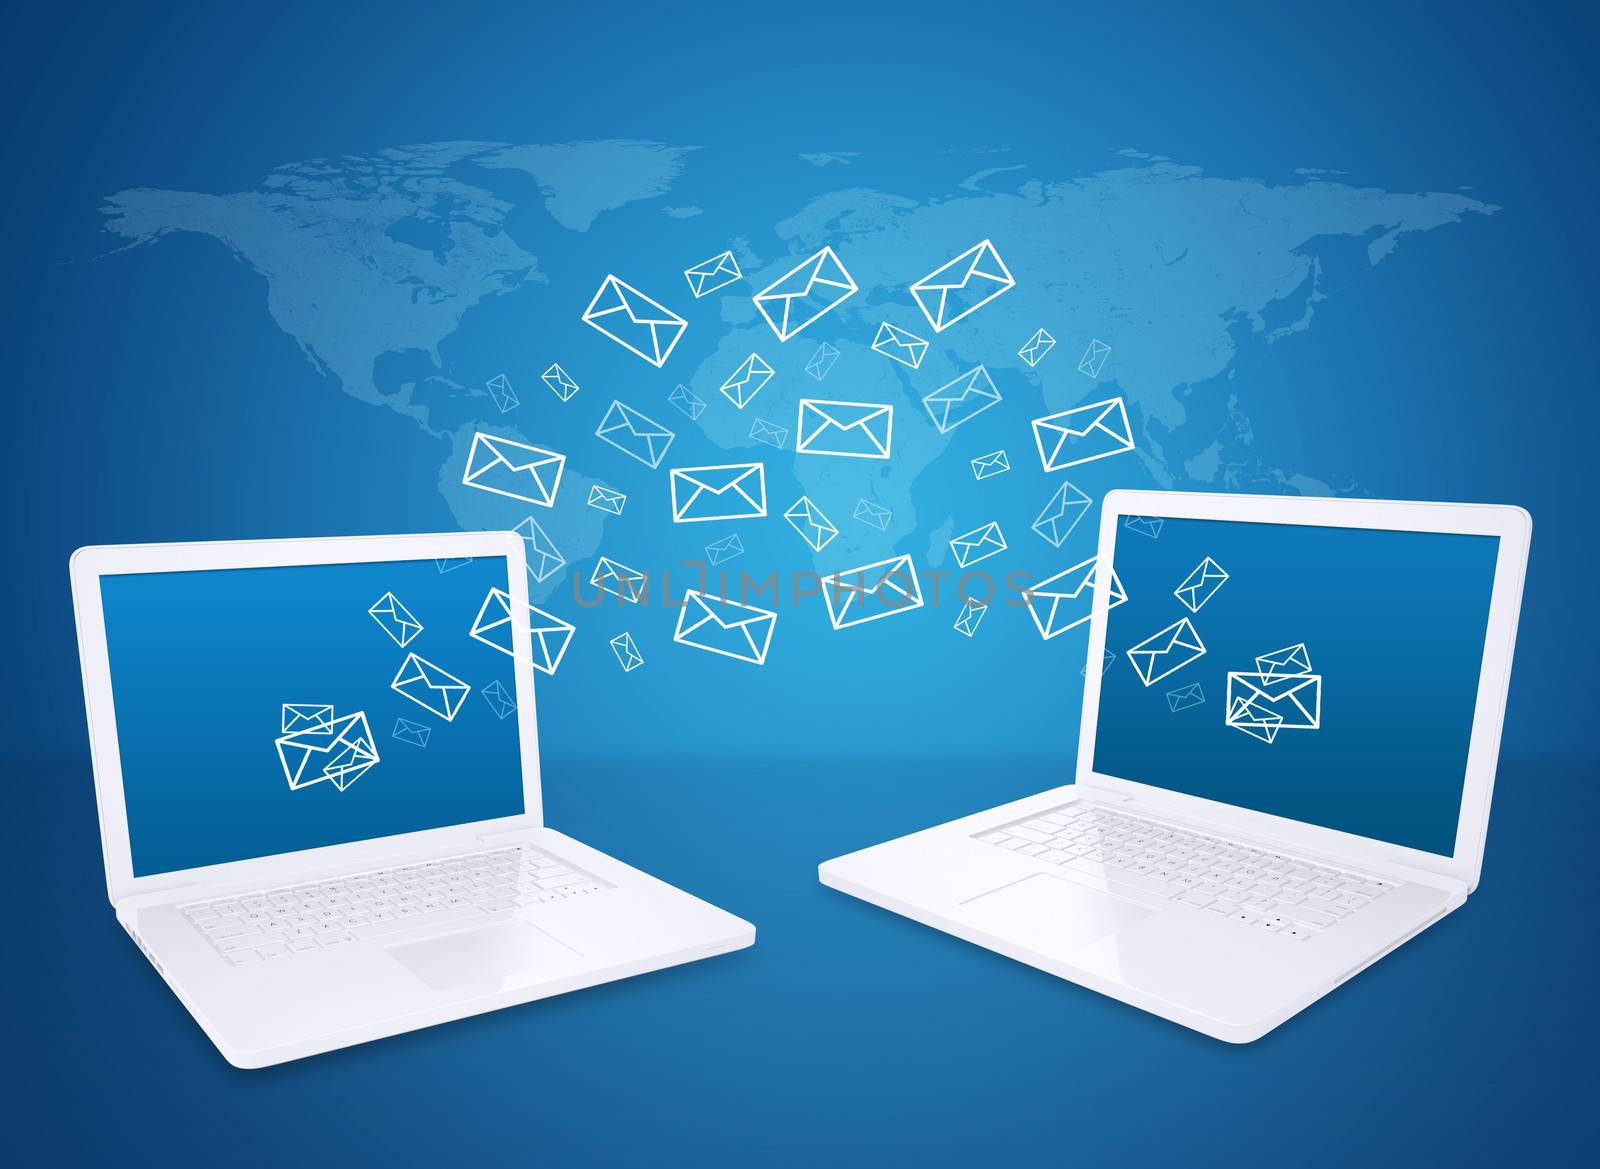 Two laptops exchange letters. The concept of e-mailing